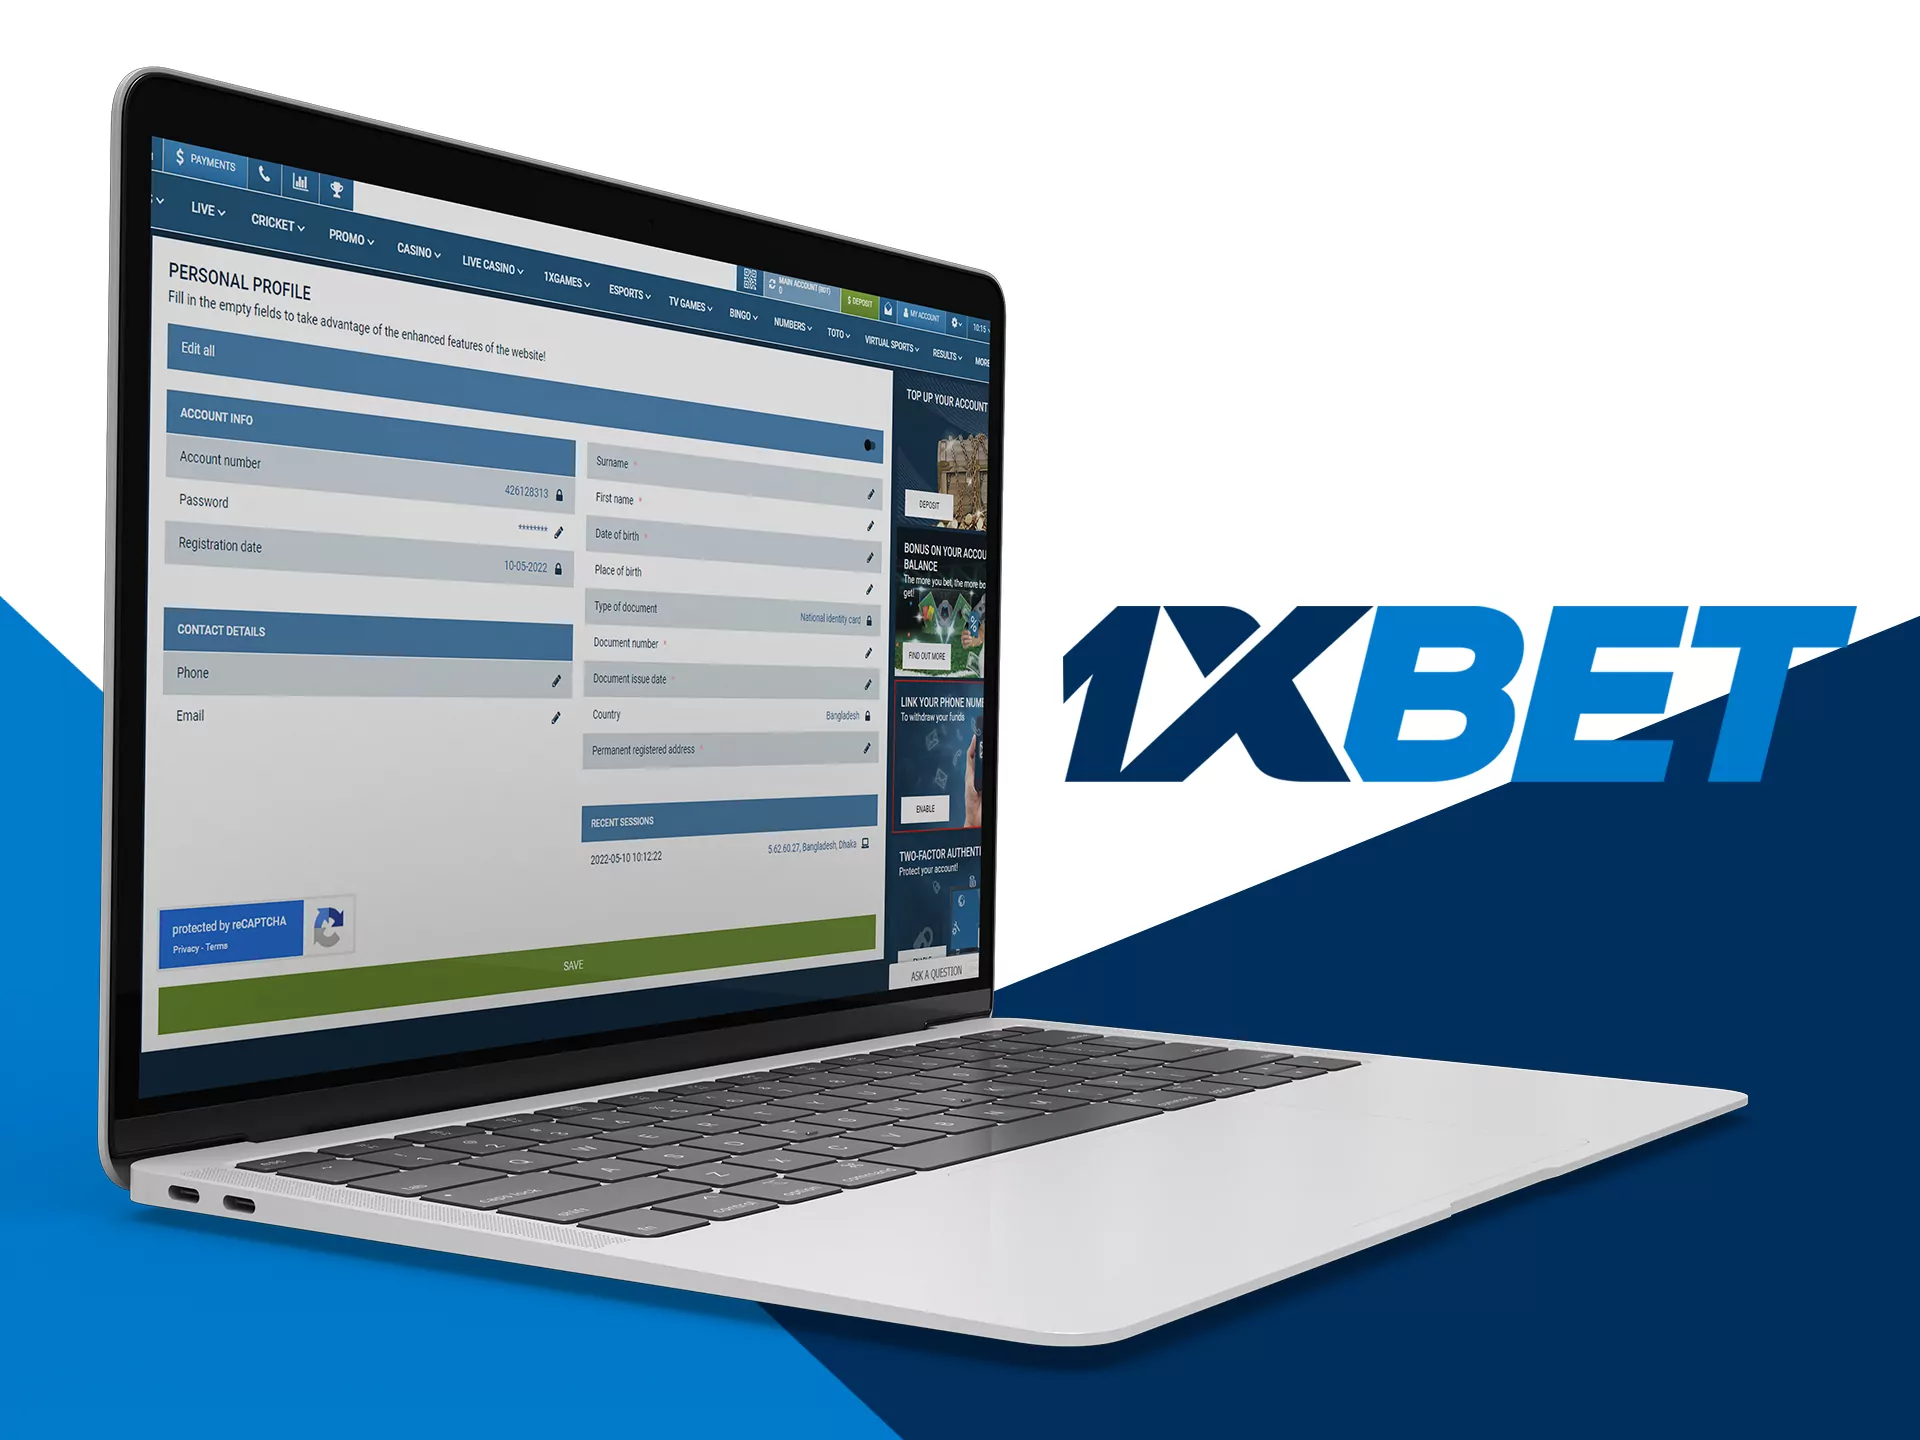 Verification on the 1xbet website.